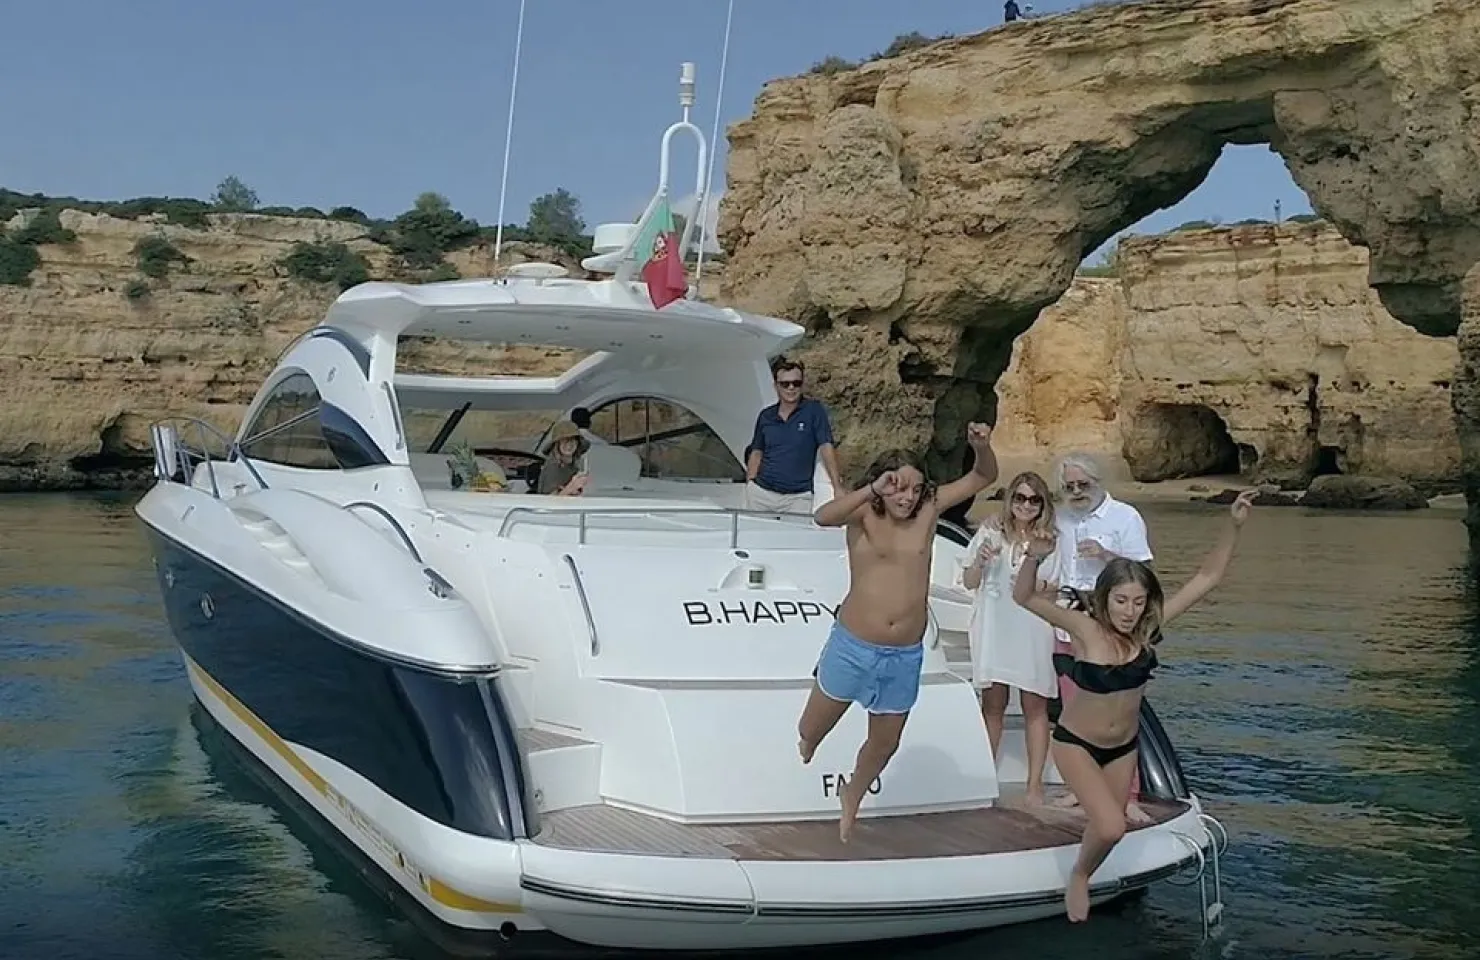 B.Happy Sunseeker 50 day charter yacht - Boats for Private Charter Vilamoura